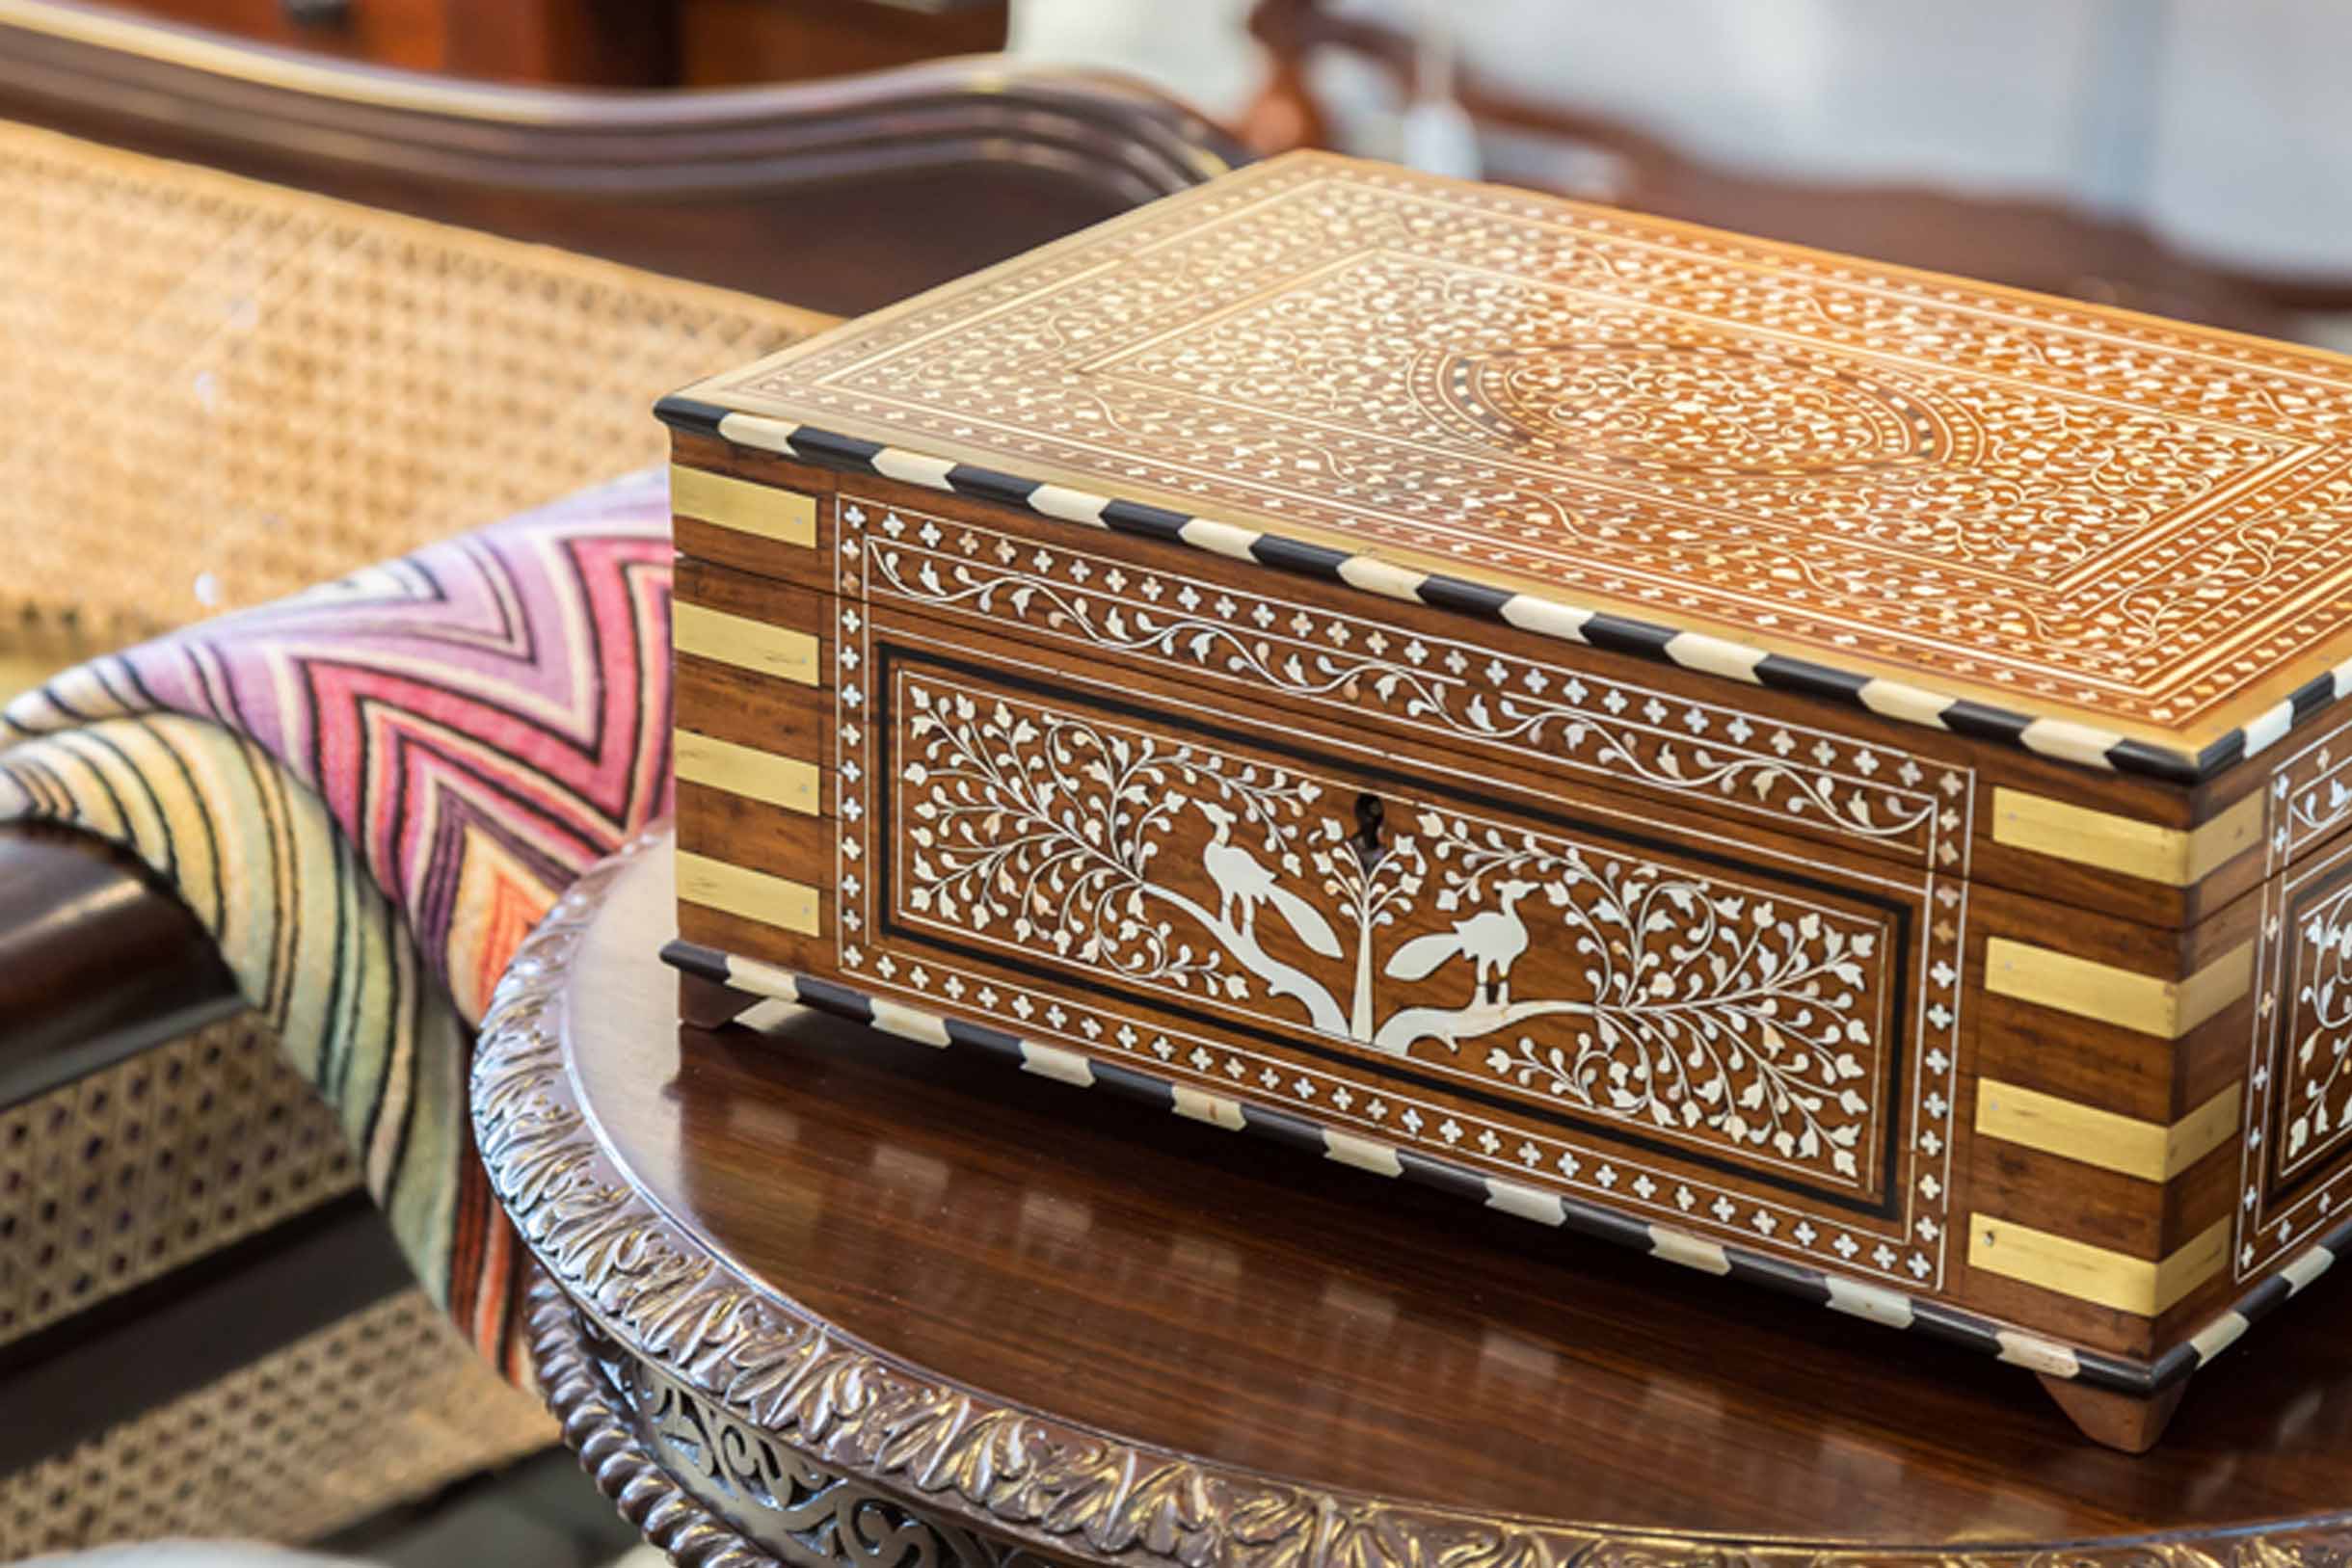 Antique Stores in Singapore - Inlaid Writing Box - The Past Perfect Collection